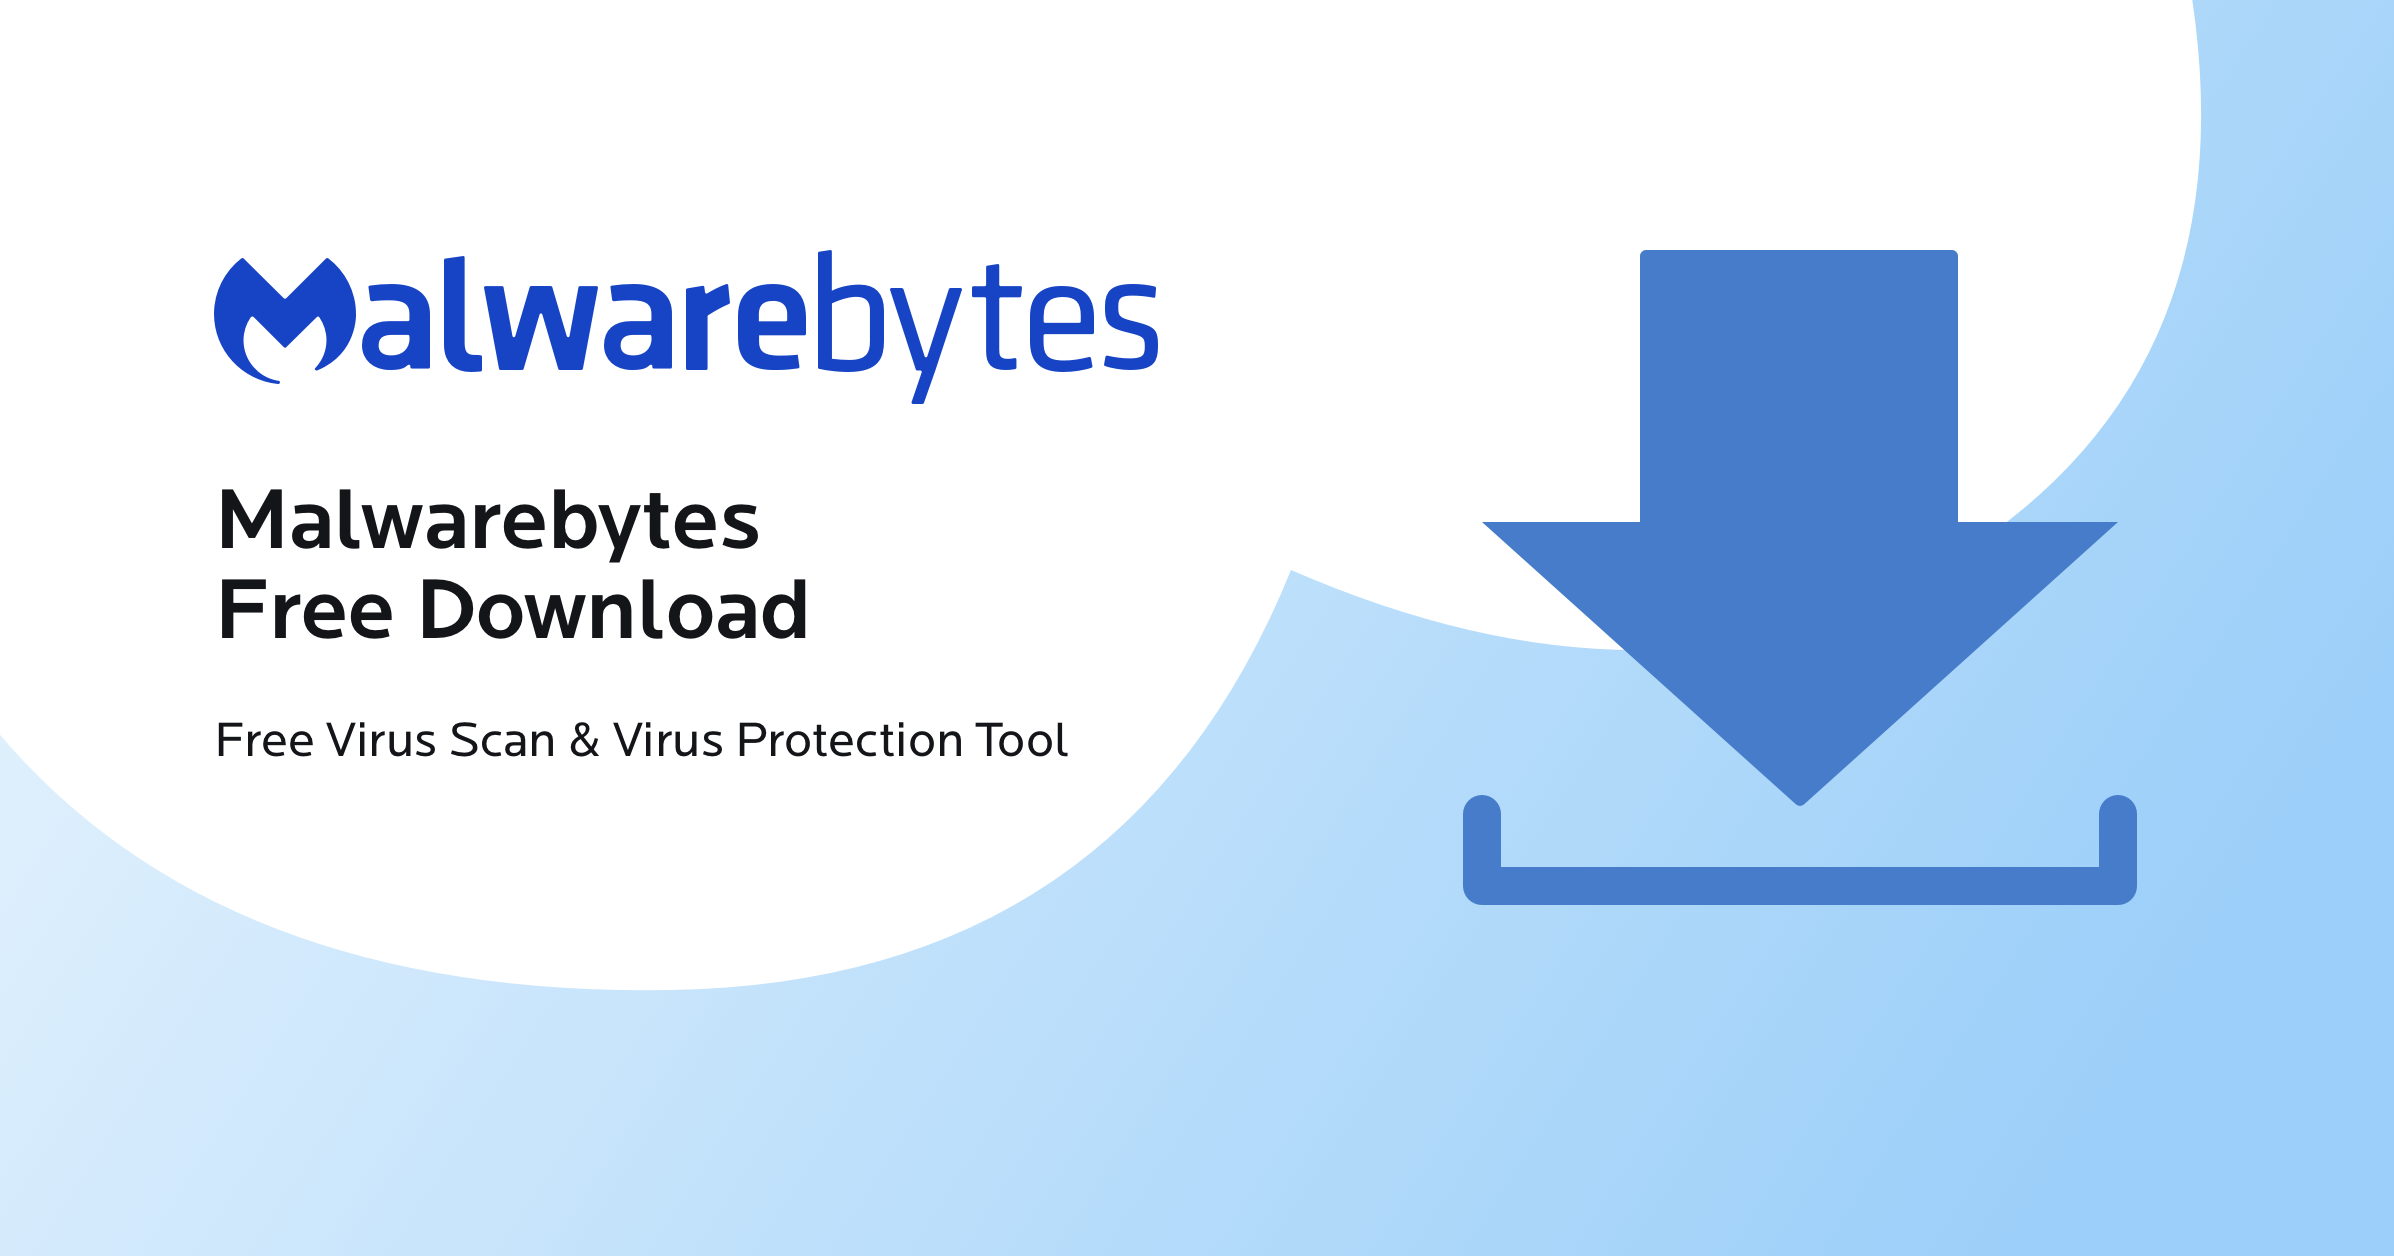 Download a reputable anti-malware program such as Malwarebytes
Install the anti-malware program on your computer